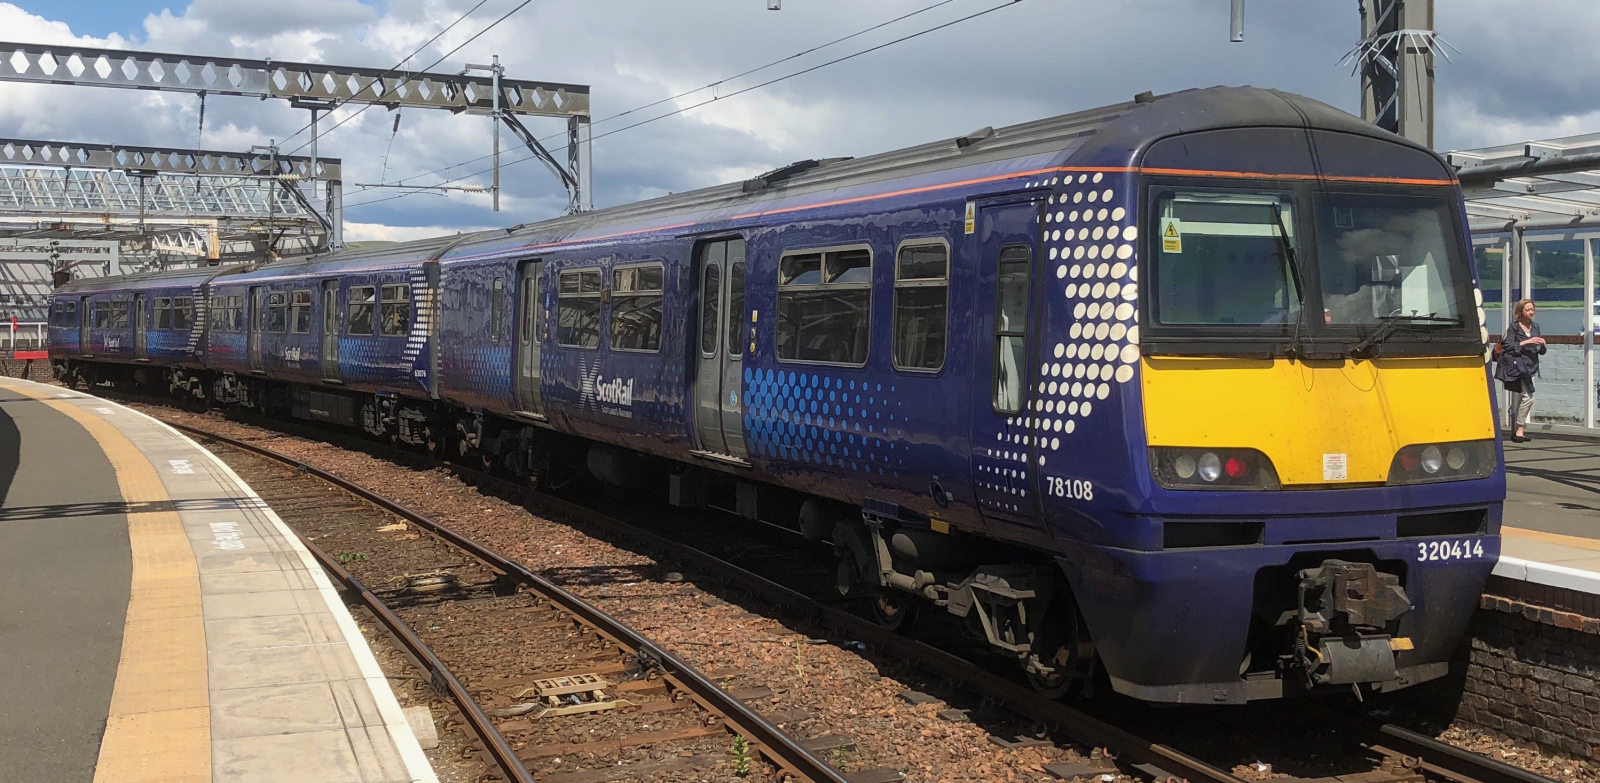 ScotRail 320414 in June 2019 at Gourock